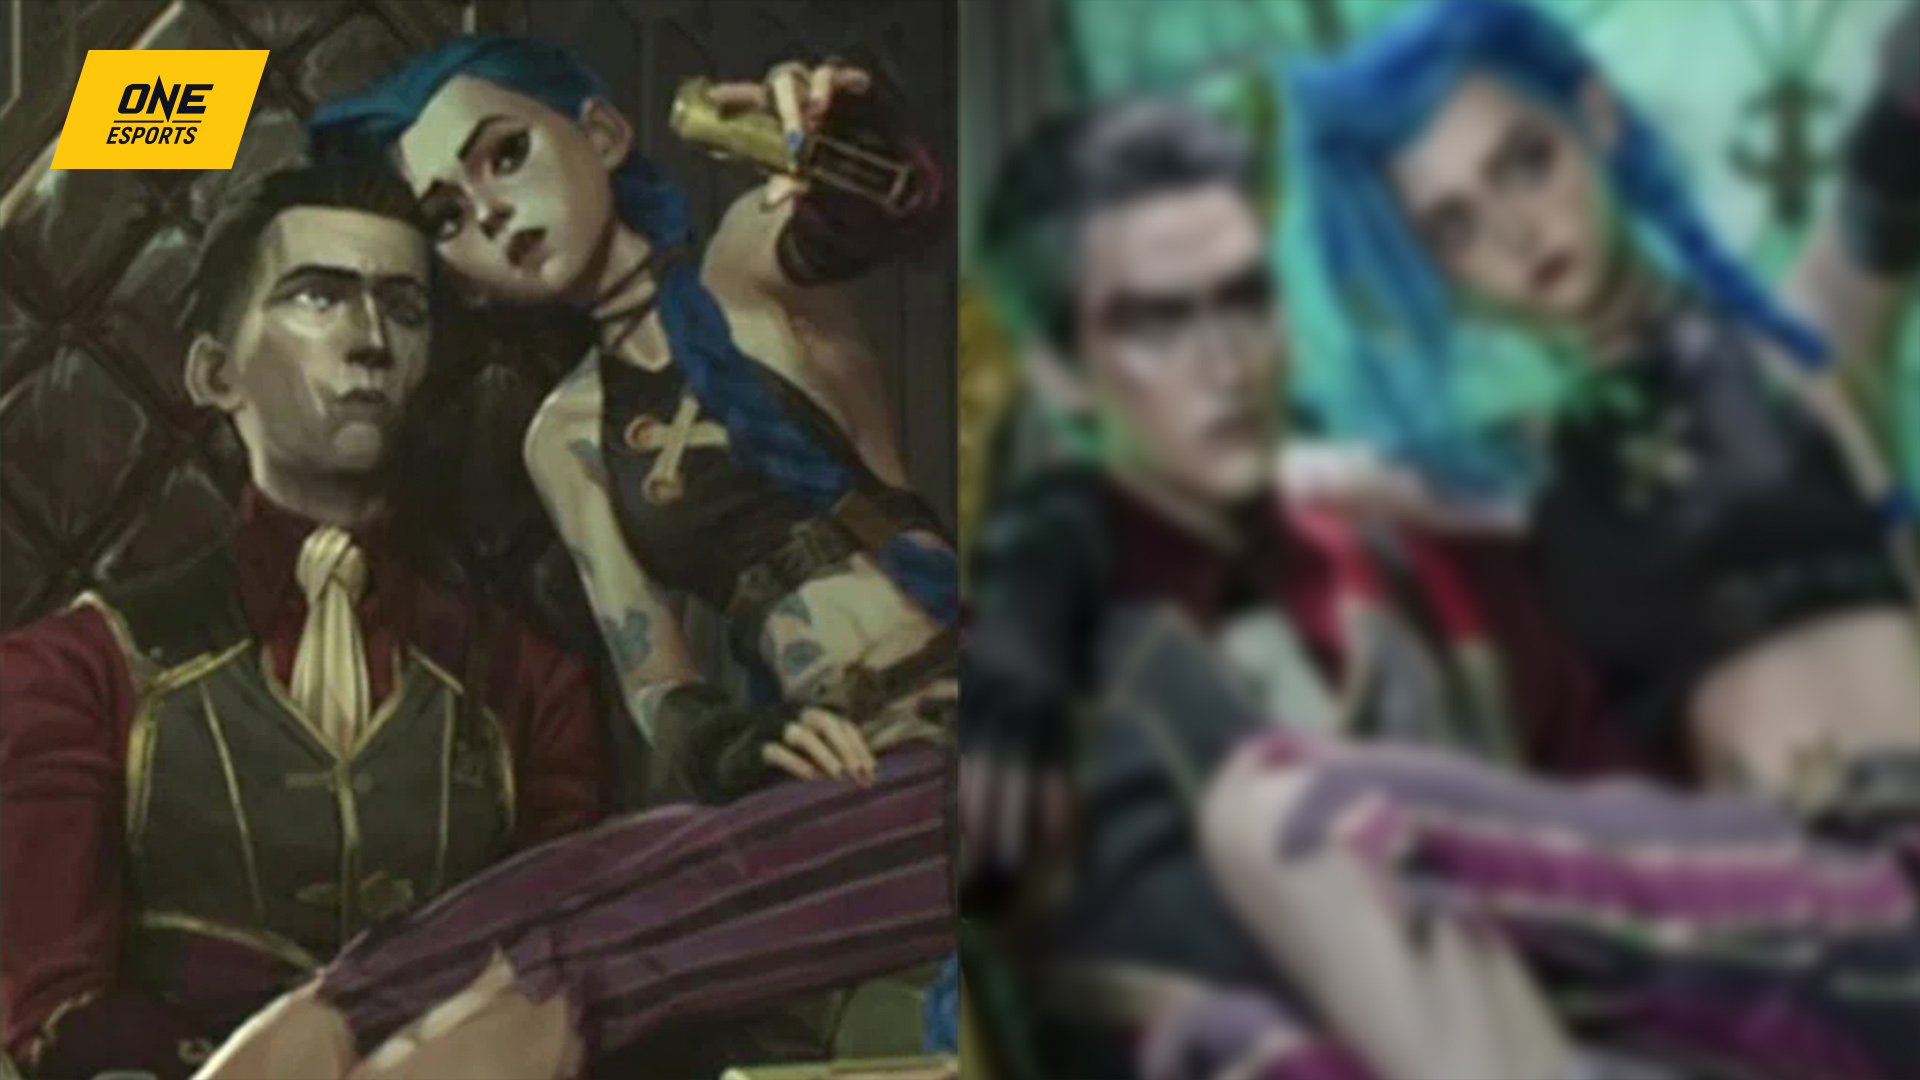 Fan artwork? Portray? Unreal Jinx and Silco cosplay makes followers do a double take